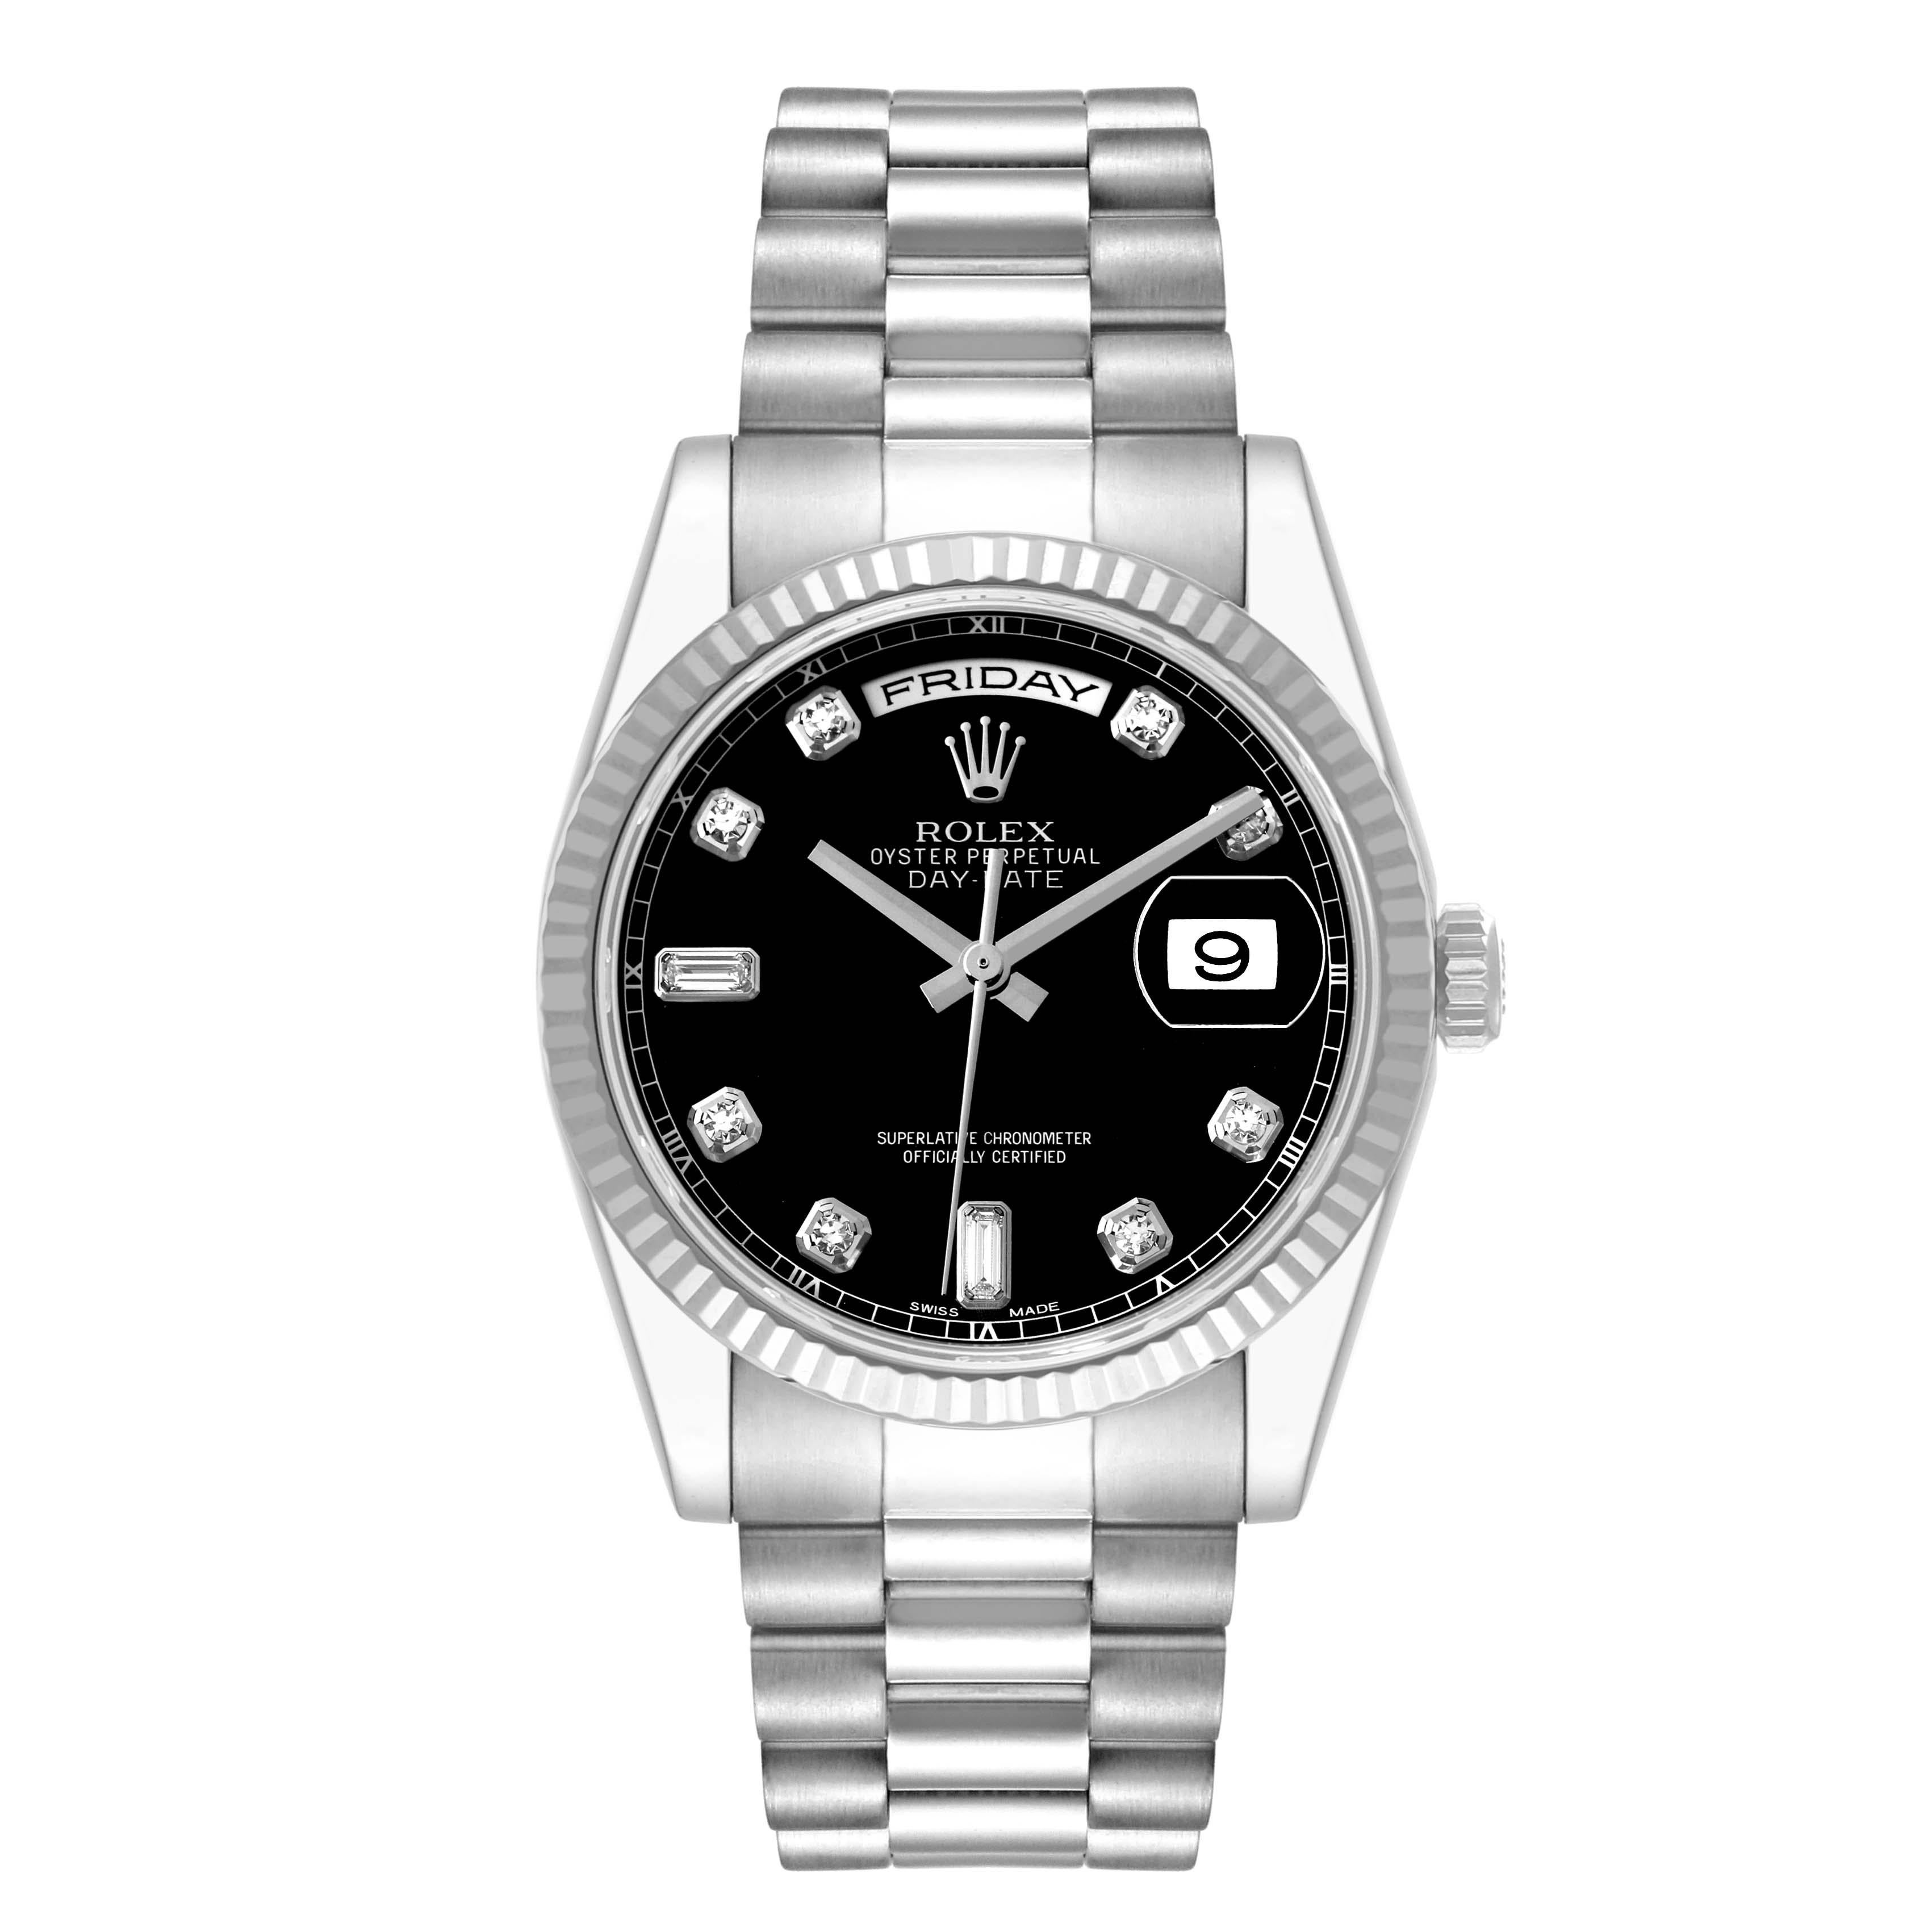 Rolex President Day-Date White Gold Diamond Dial Mens Watch 118239 Box Card. Officially certified chronometer self-winding movement. 18k white gold oyster case 36.0 mm in diameter. Rolex logo on a crown. 18k white gold fluted bezel. Scratch